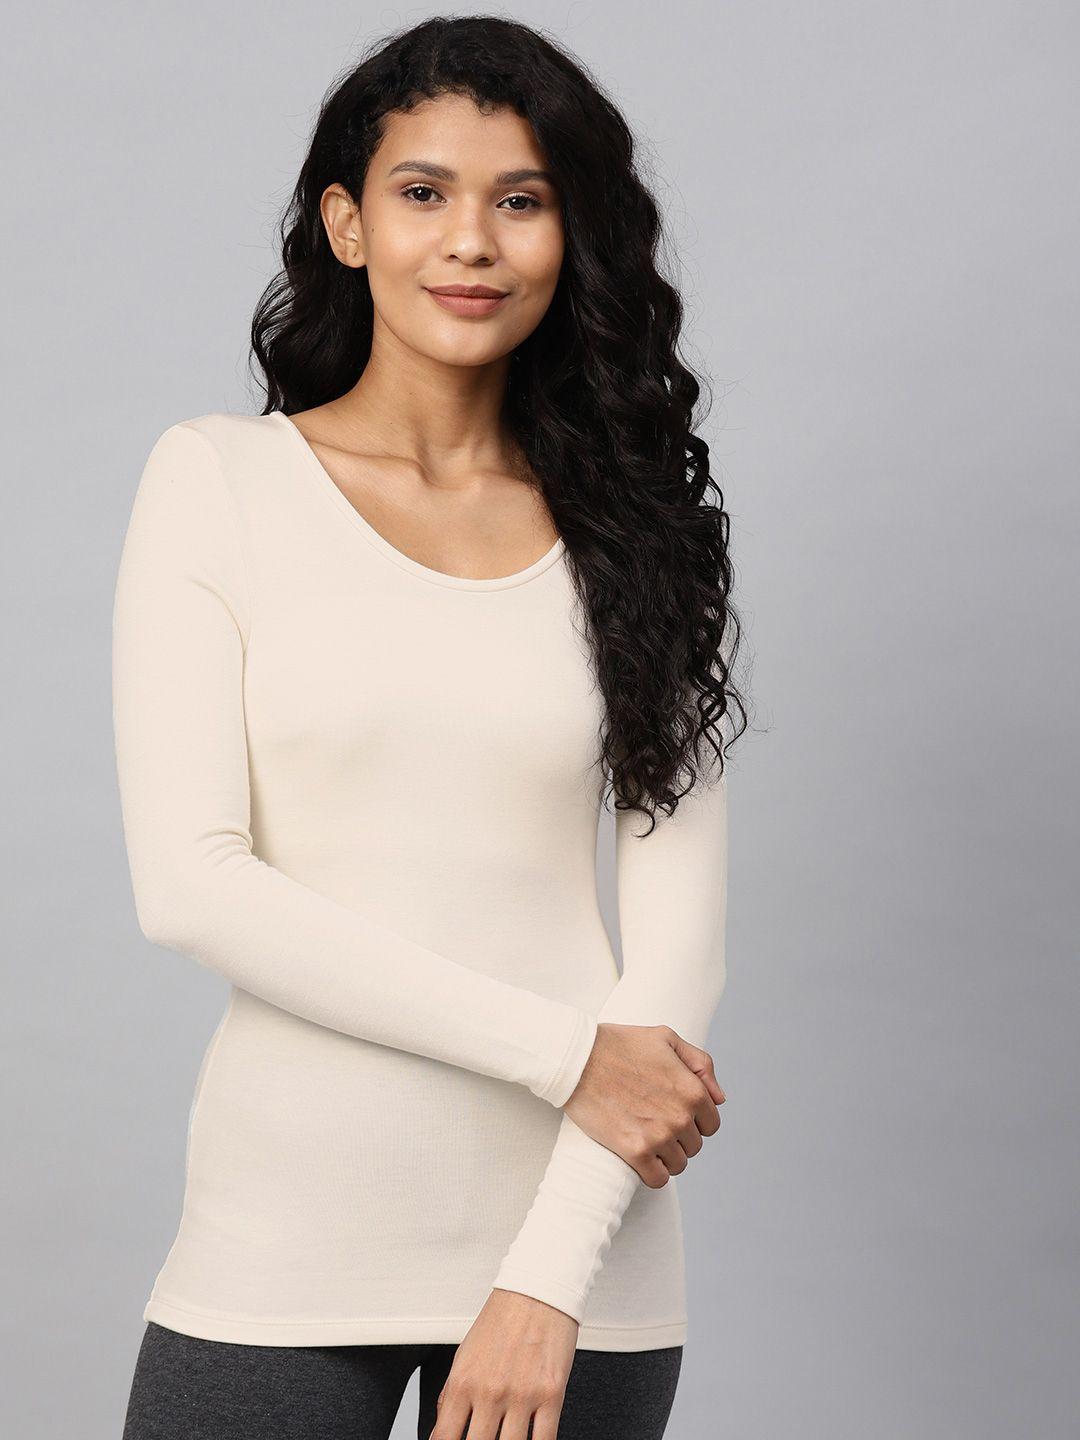 marks-&-spencer-women-cream-coloured-solid-thermal-top